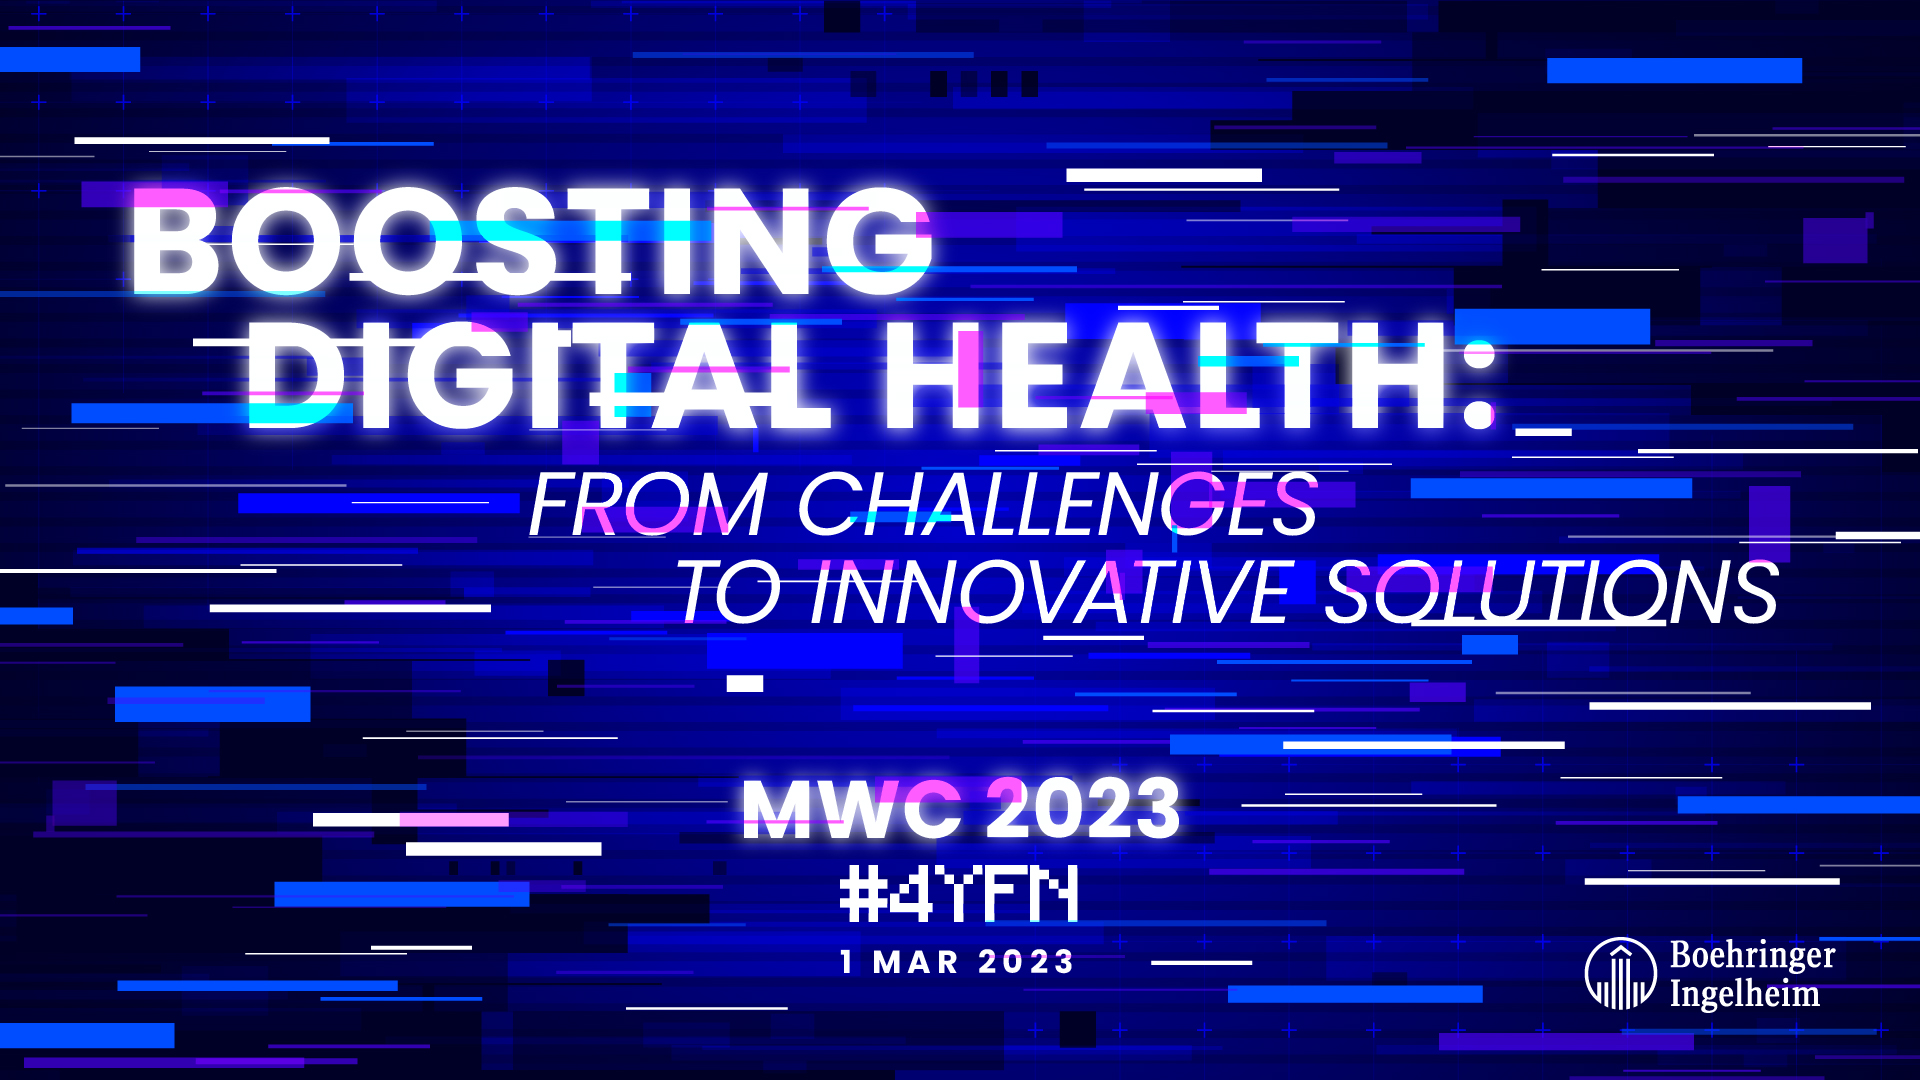 Join Boehringer-Ingelheim at 4YFN and discover: Boosting Digital Health - From challenges to innovative solutions